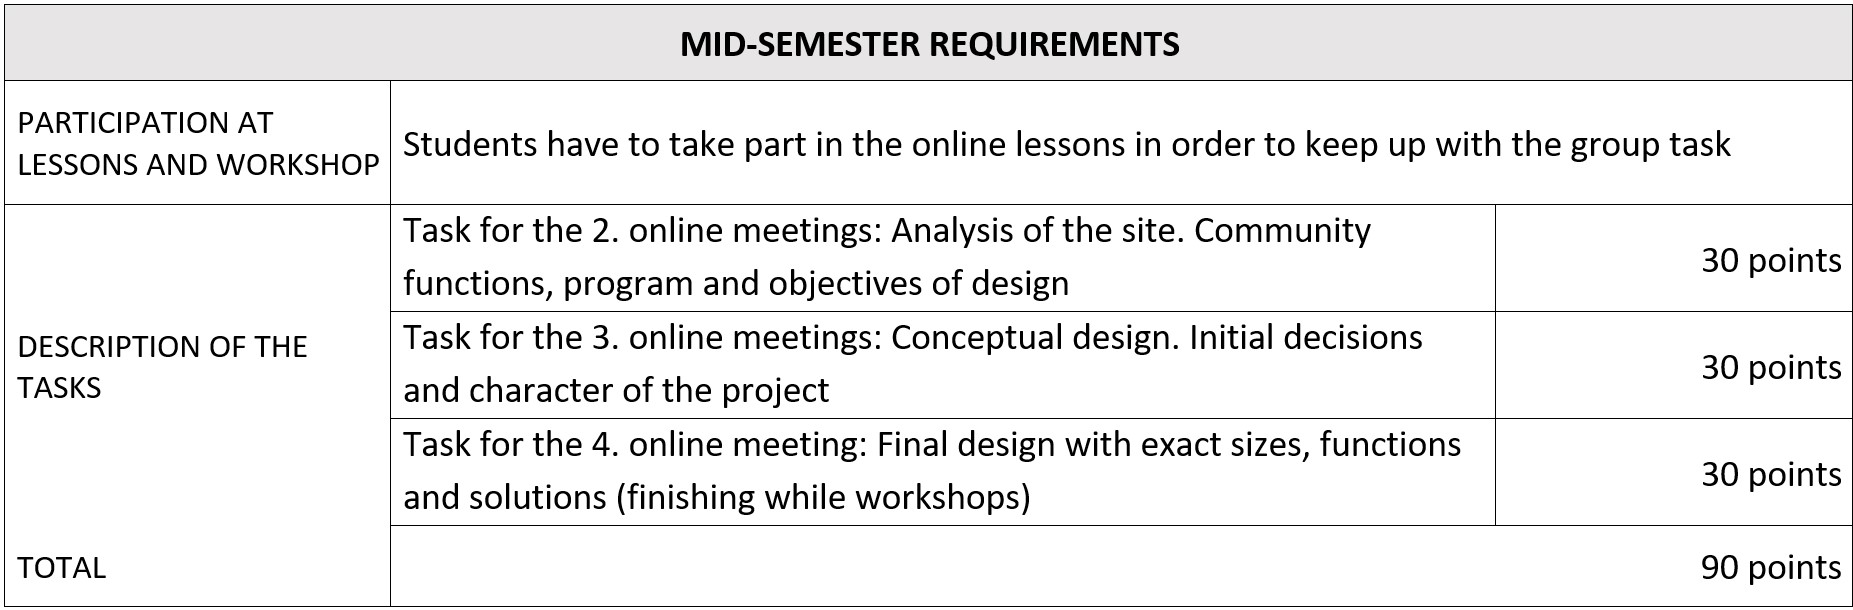 01_Mid-semester-requirements